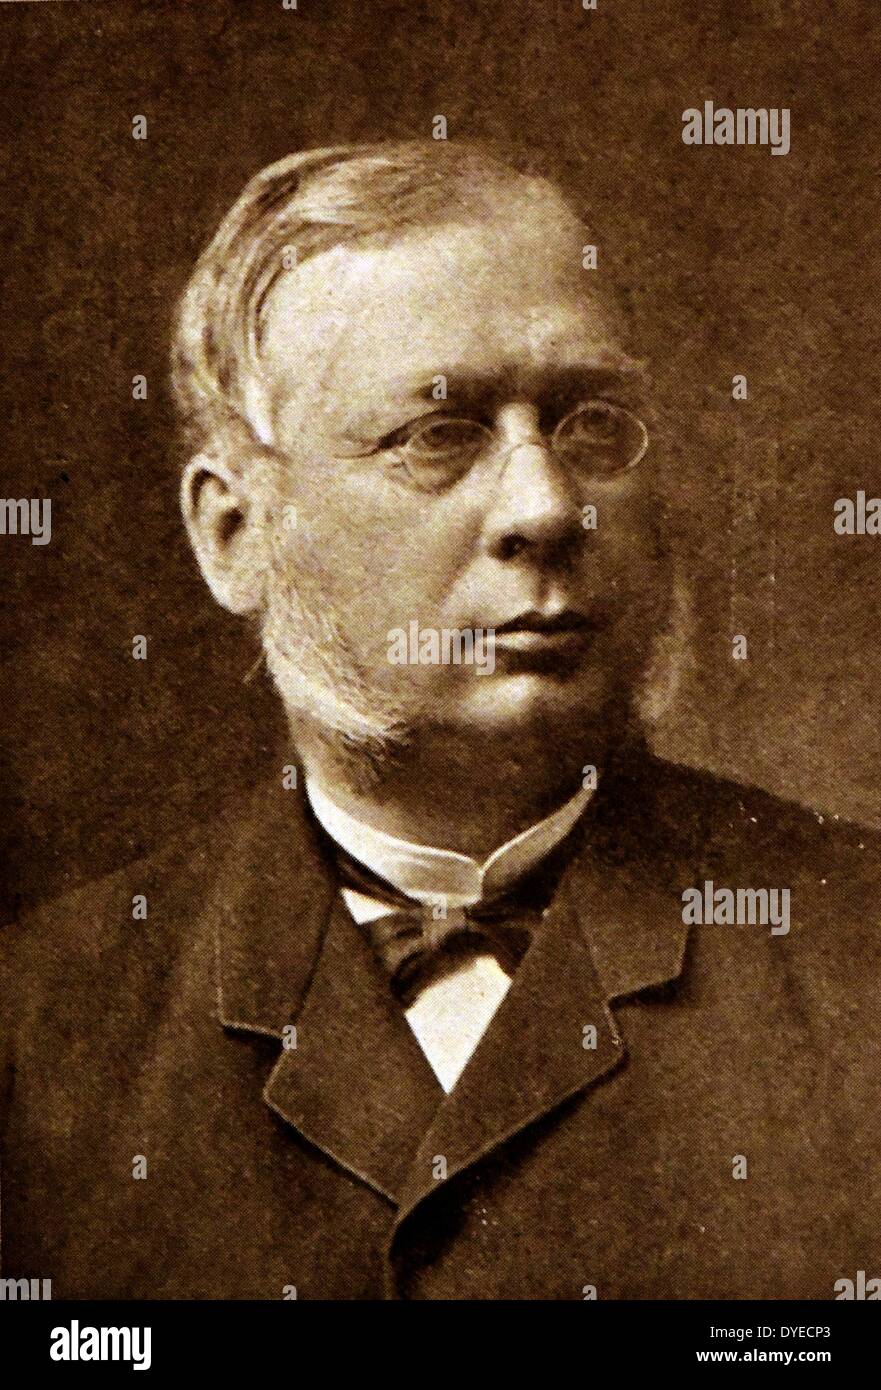 Illustration of Emil Stang (1834 - 1912). A Norwegian jurist and statesman. Dated 1880 Stock Photo